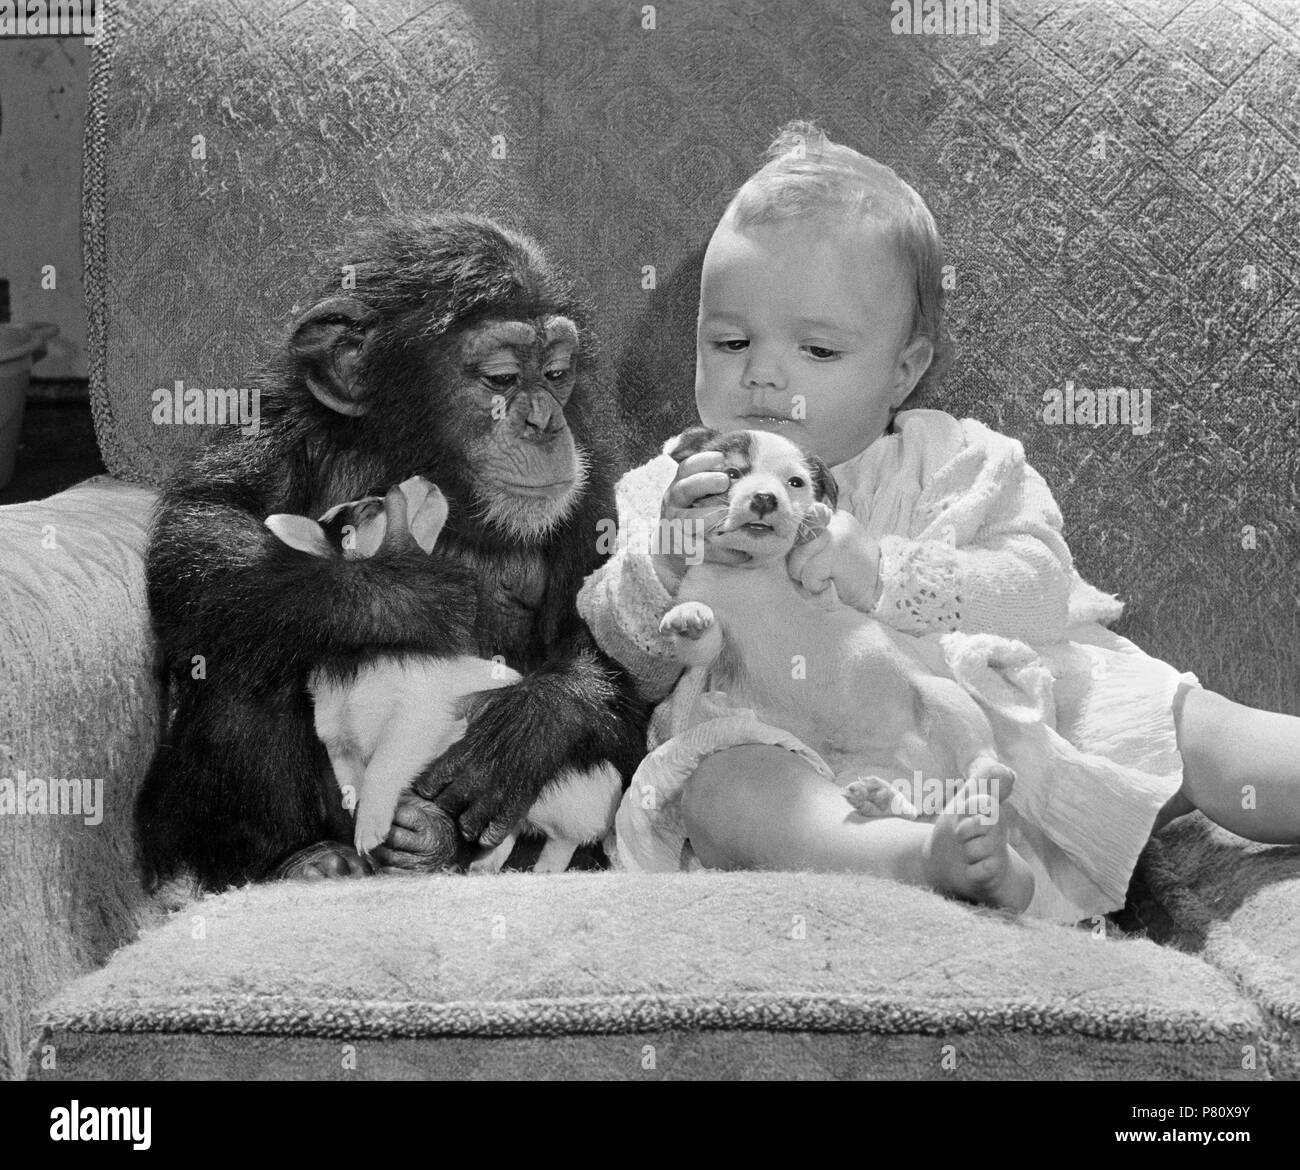 Chimpanzee with baby and Jack Russell puppies, England, Great Britain Stock Photo